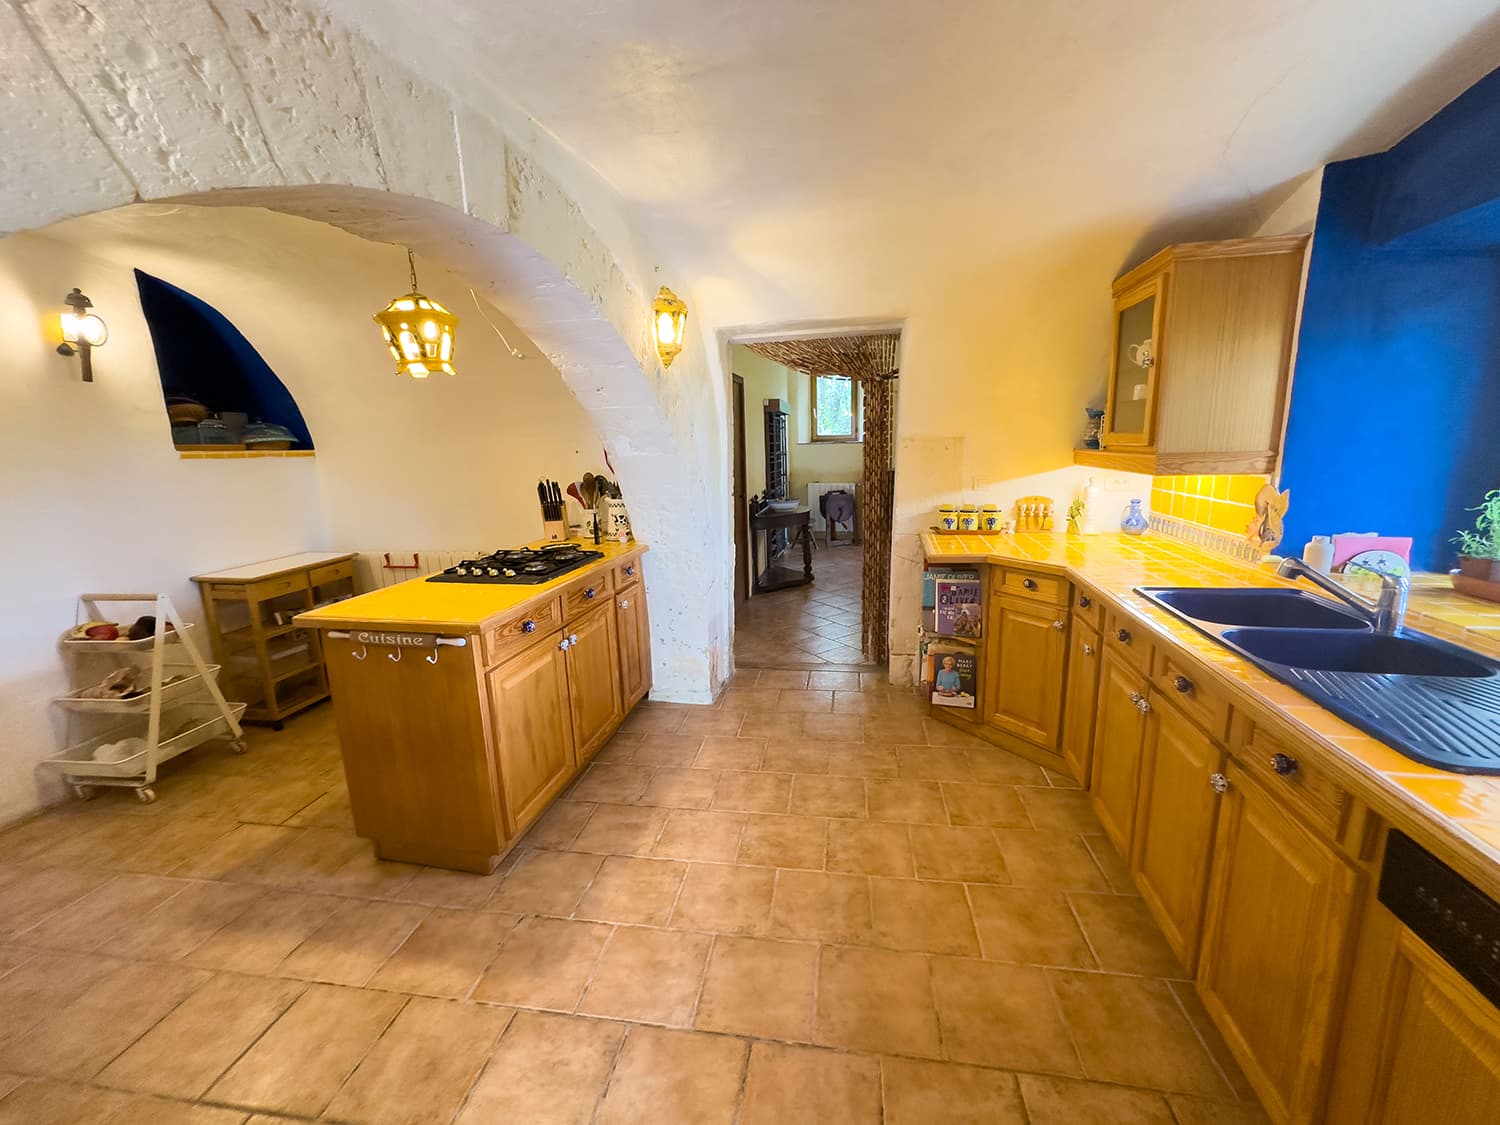 Kitchen | Holiday home in Gard, South of France